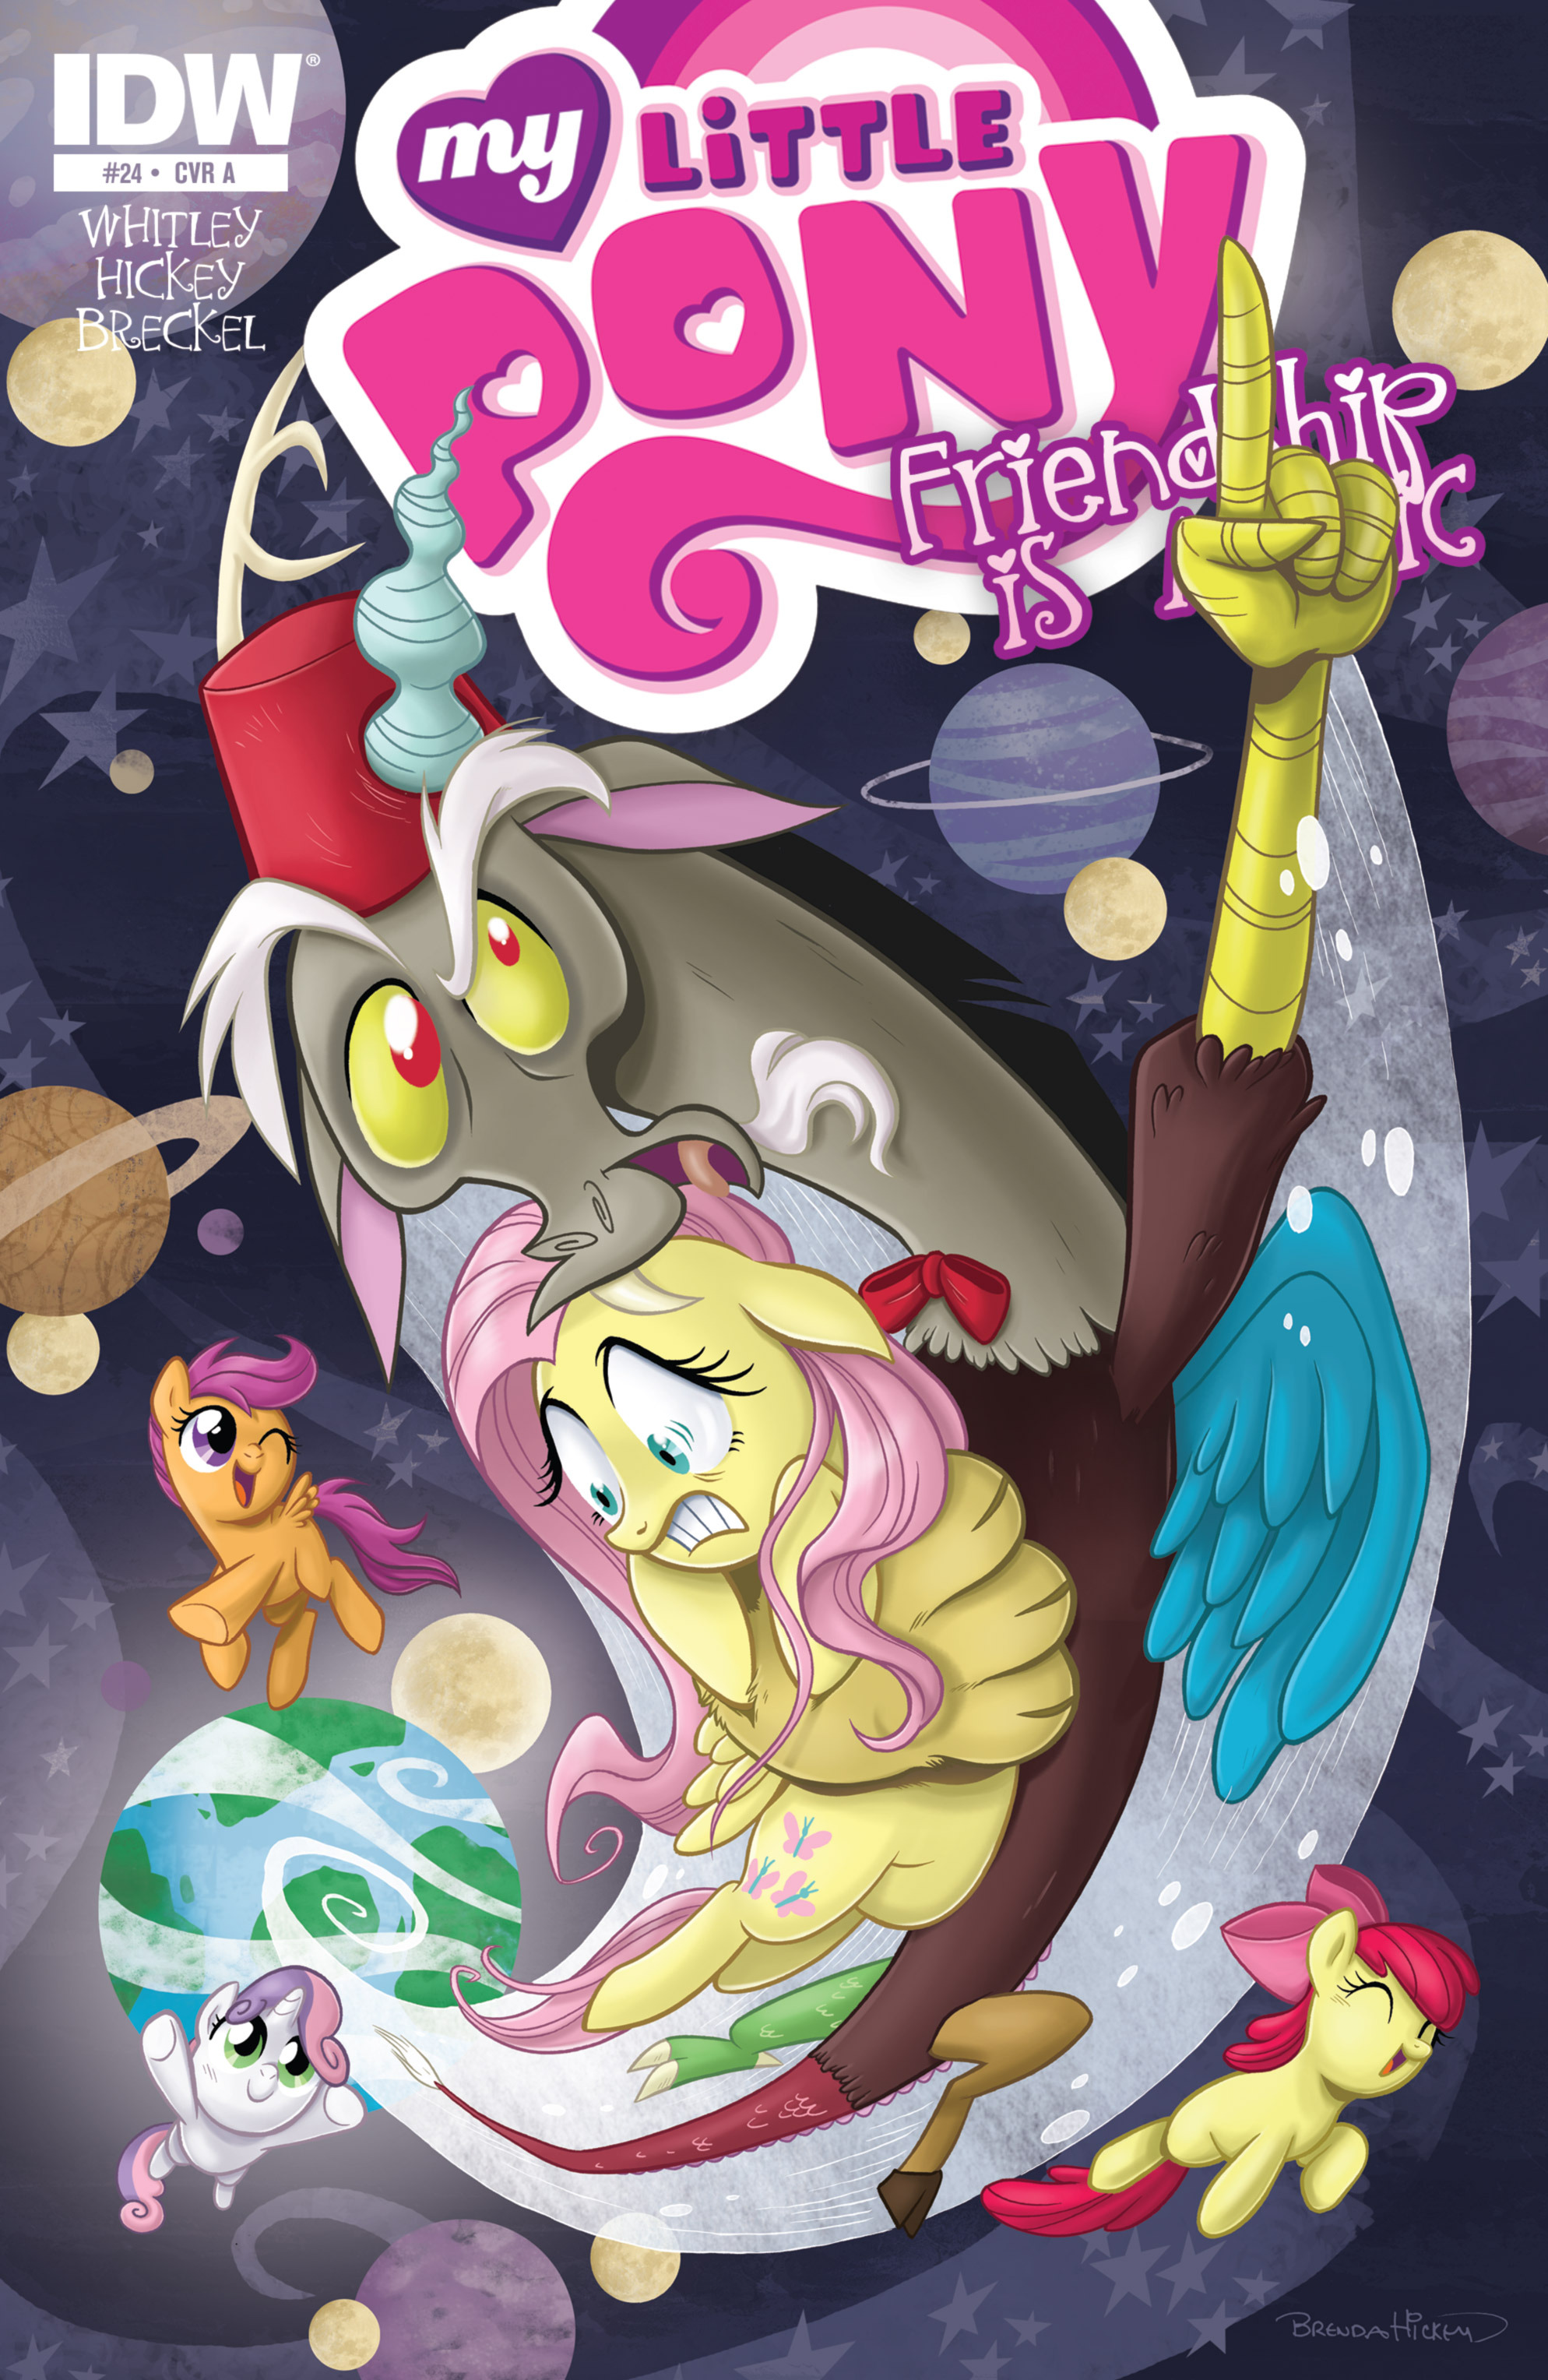 Read online My Little Pony: Friendship is Magic comic -  Issue #24 - 1